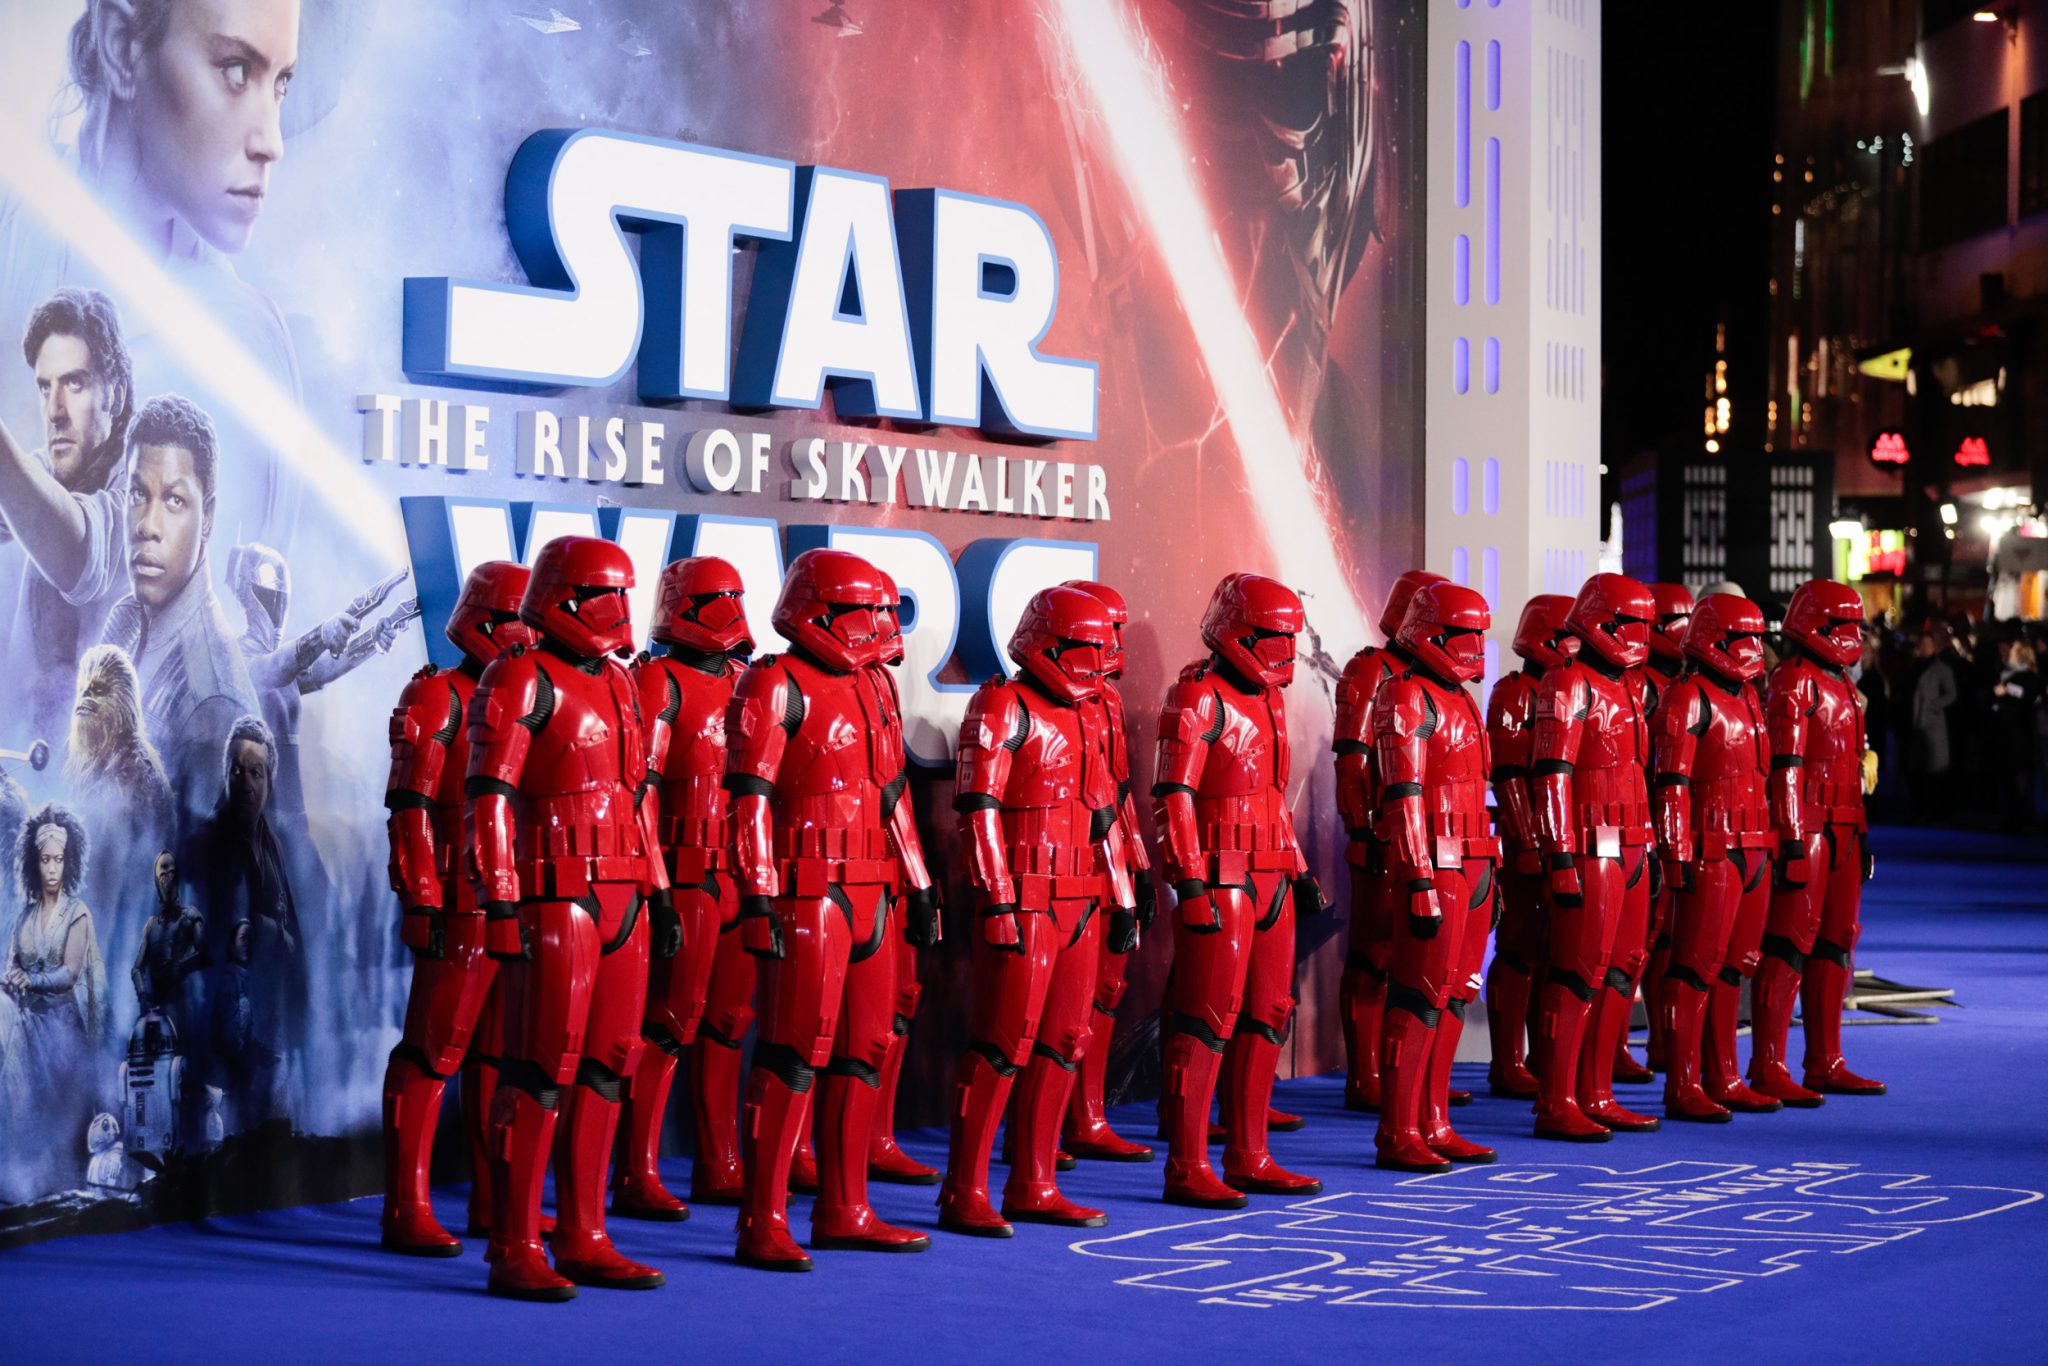 Stormtroopers in red uniforms lined up against Star Wars: The Rise of Skywalker poster